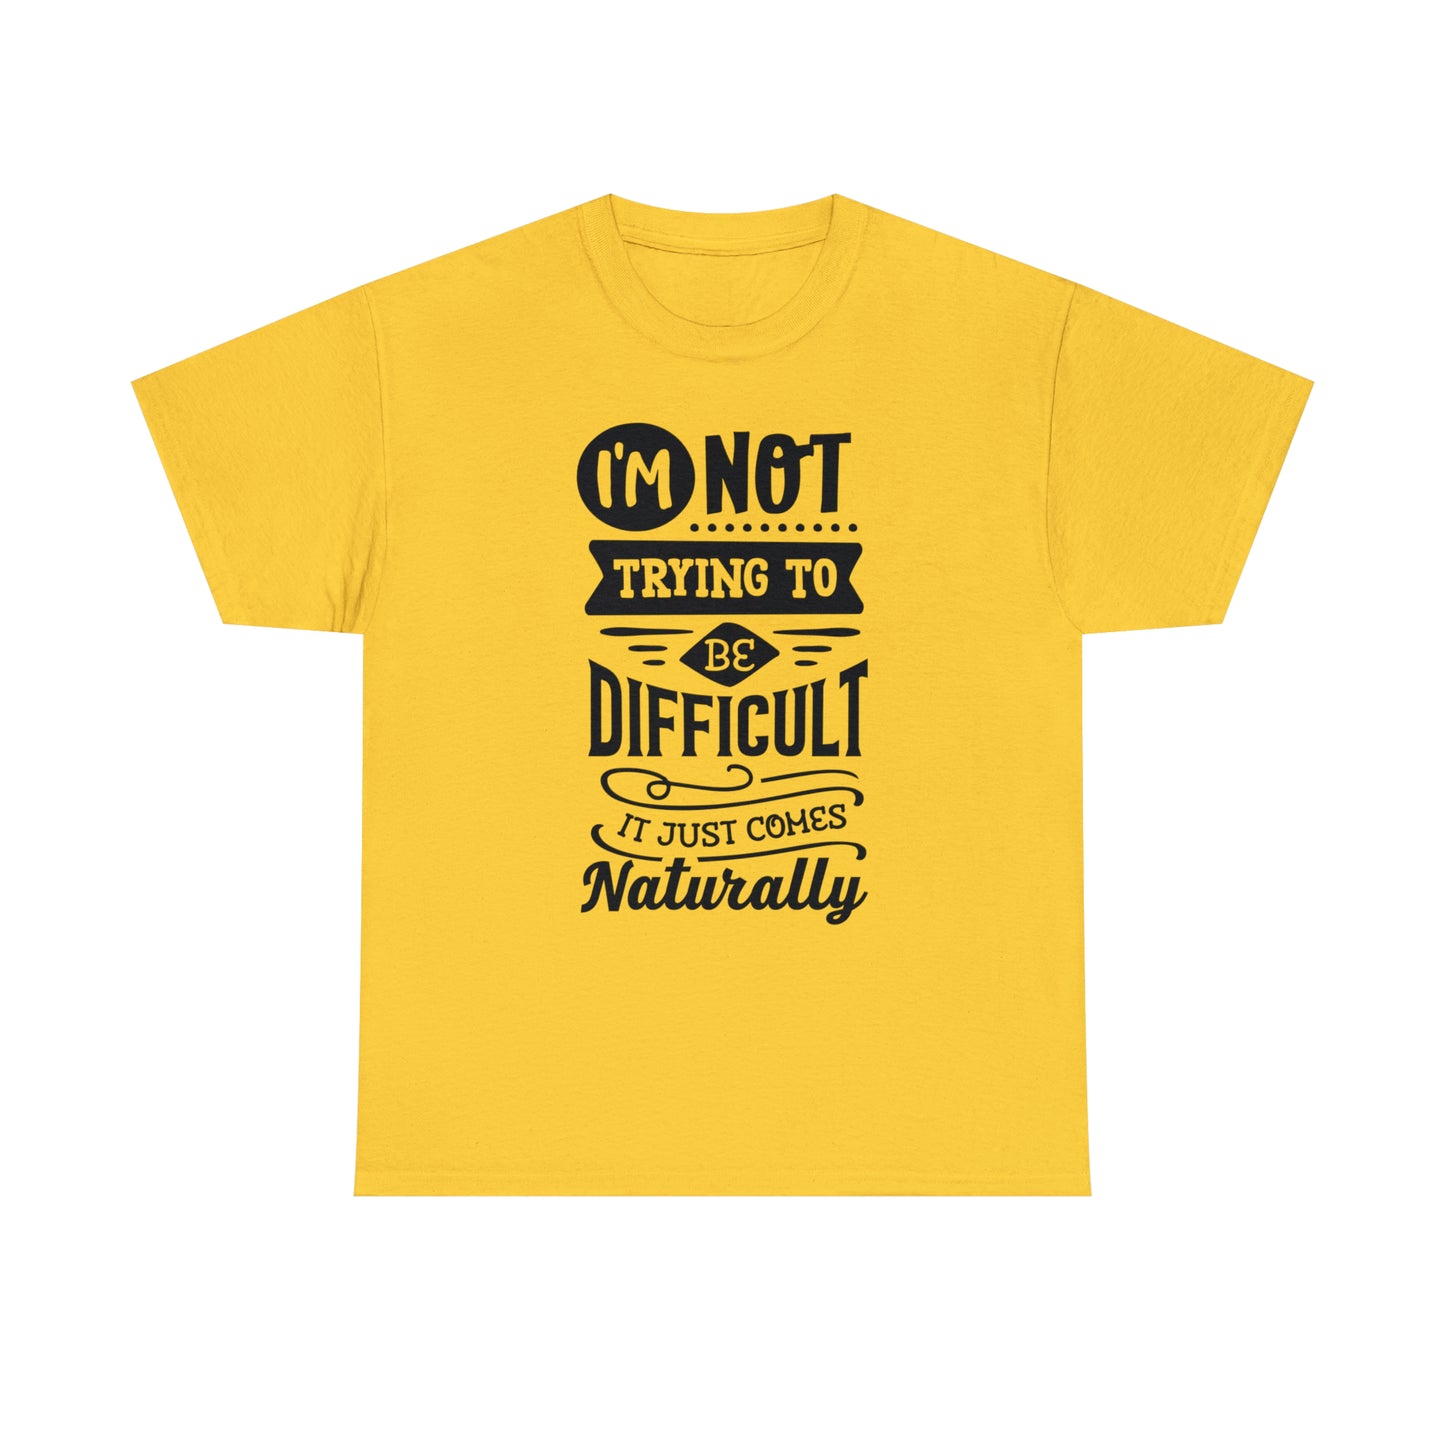 I'm Not Trying to Be Difficult Tee